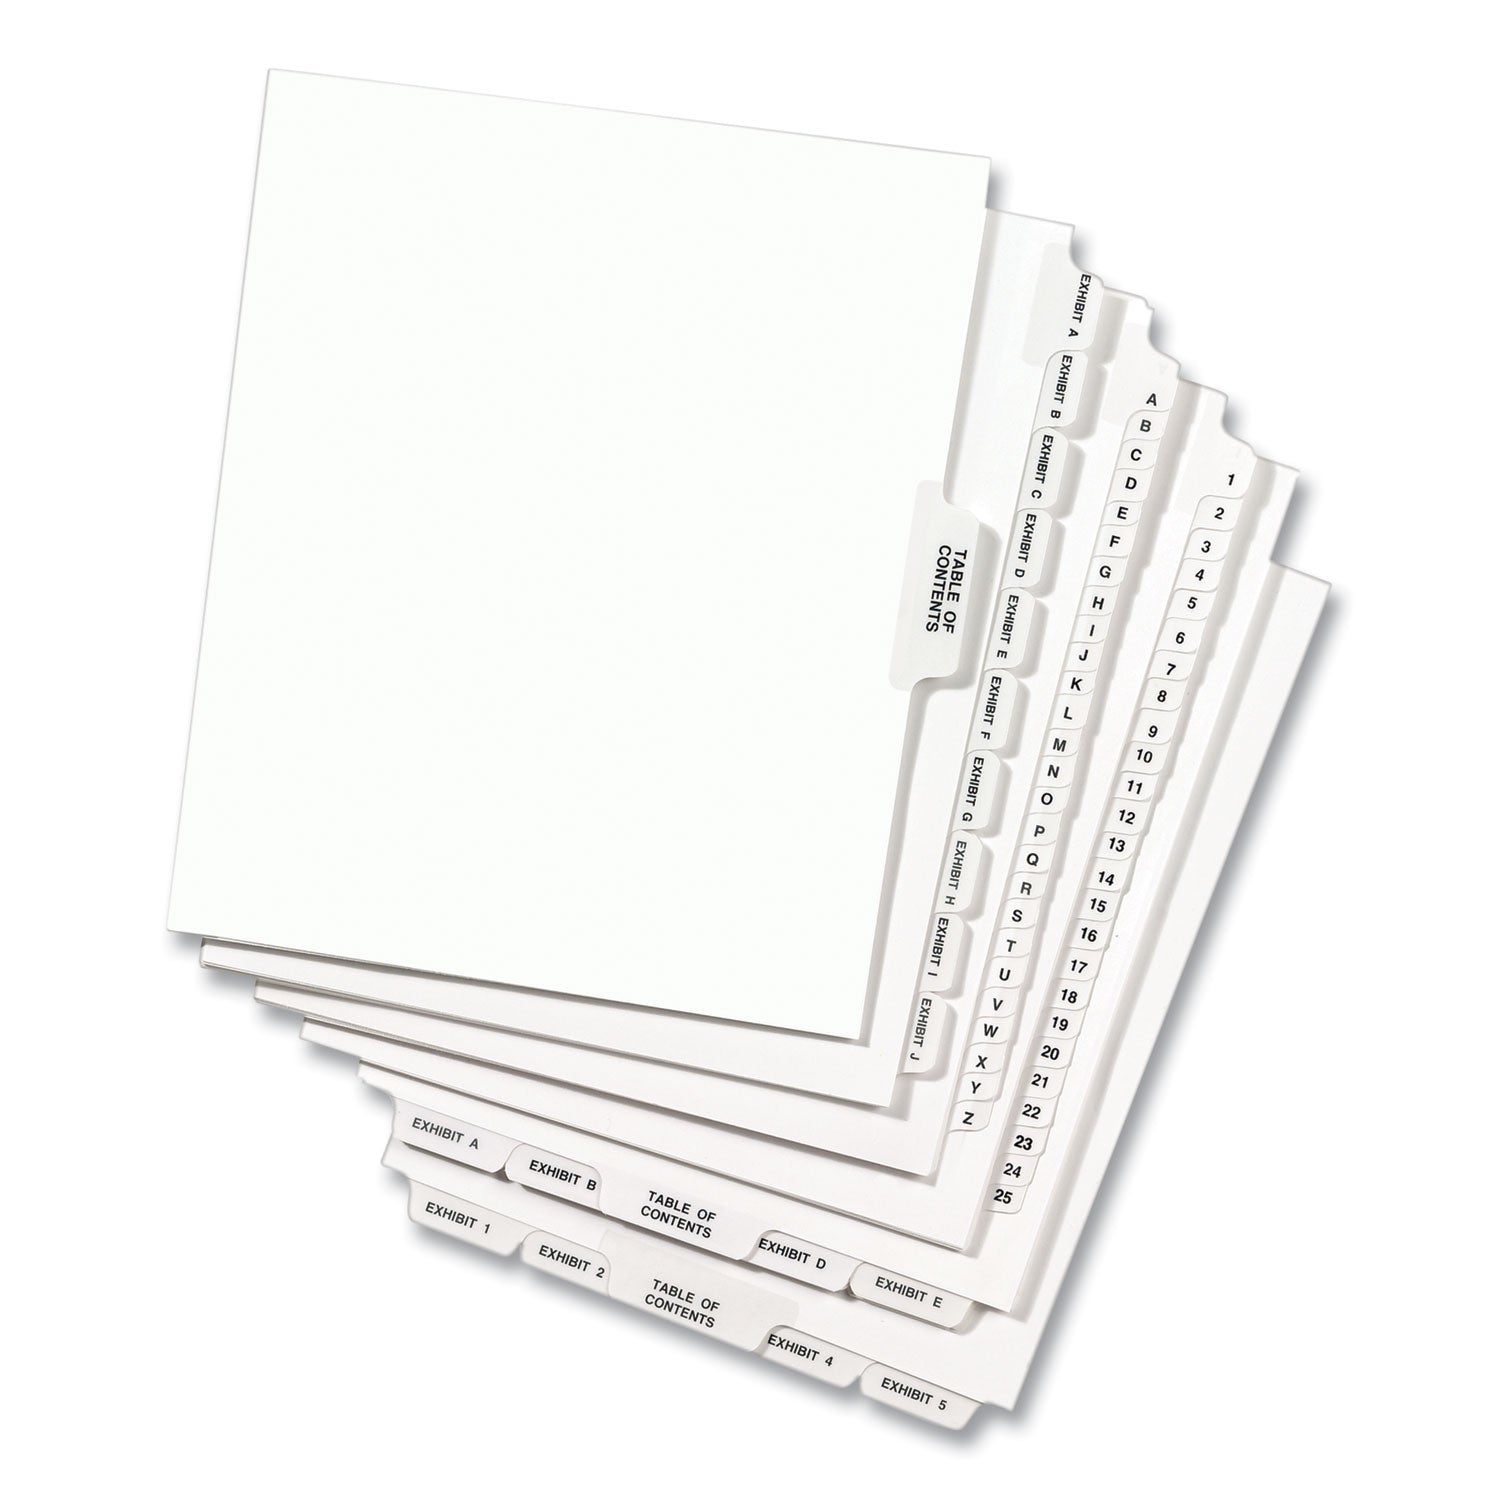 Preprinted Legal Exhibit Side Tab Index Dividers, Avery Style, 26-Tab, J, 11 x 8.5, White, 25/Pack, (1410) - 